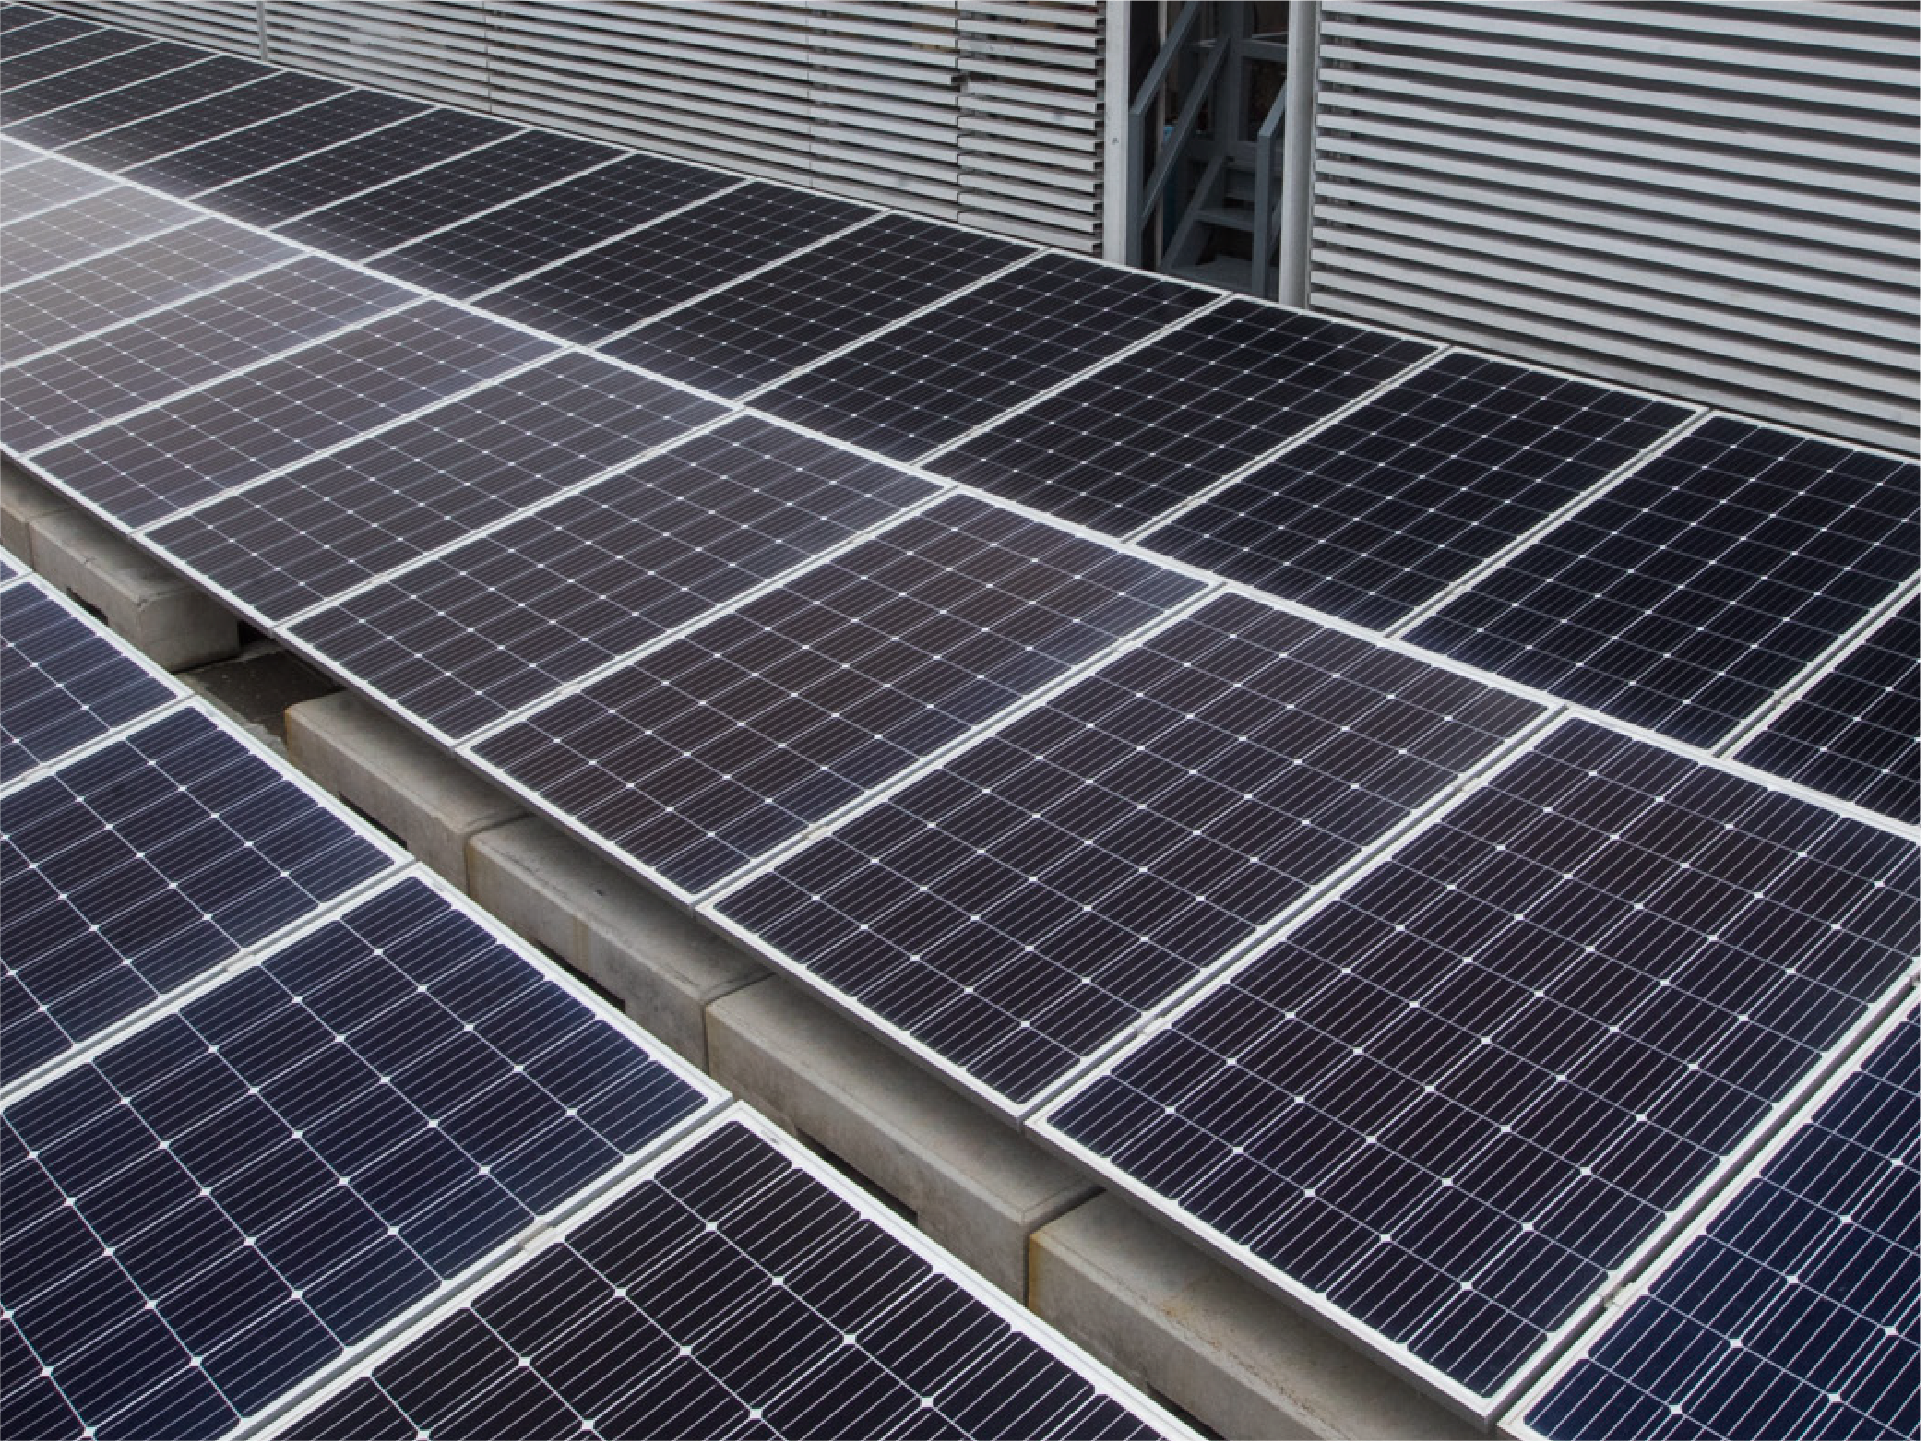 1,600sqm of solar panels were installed on the roof of SuperTerminal 1